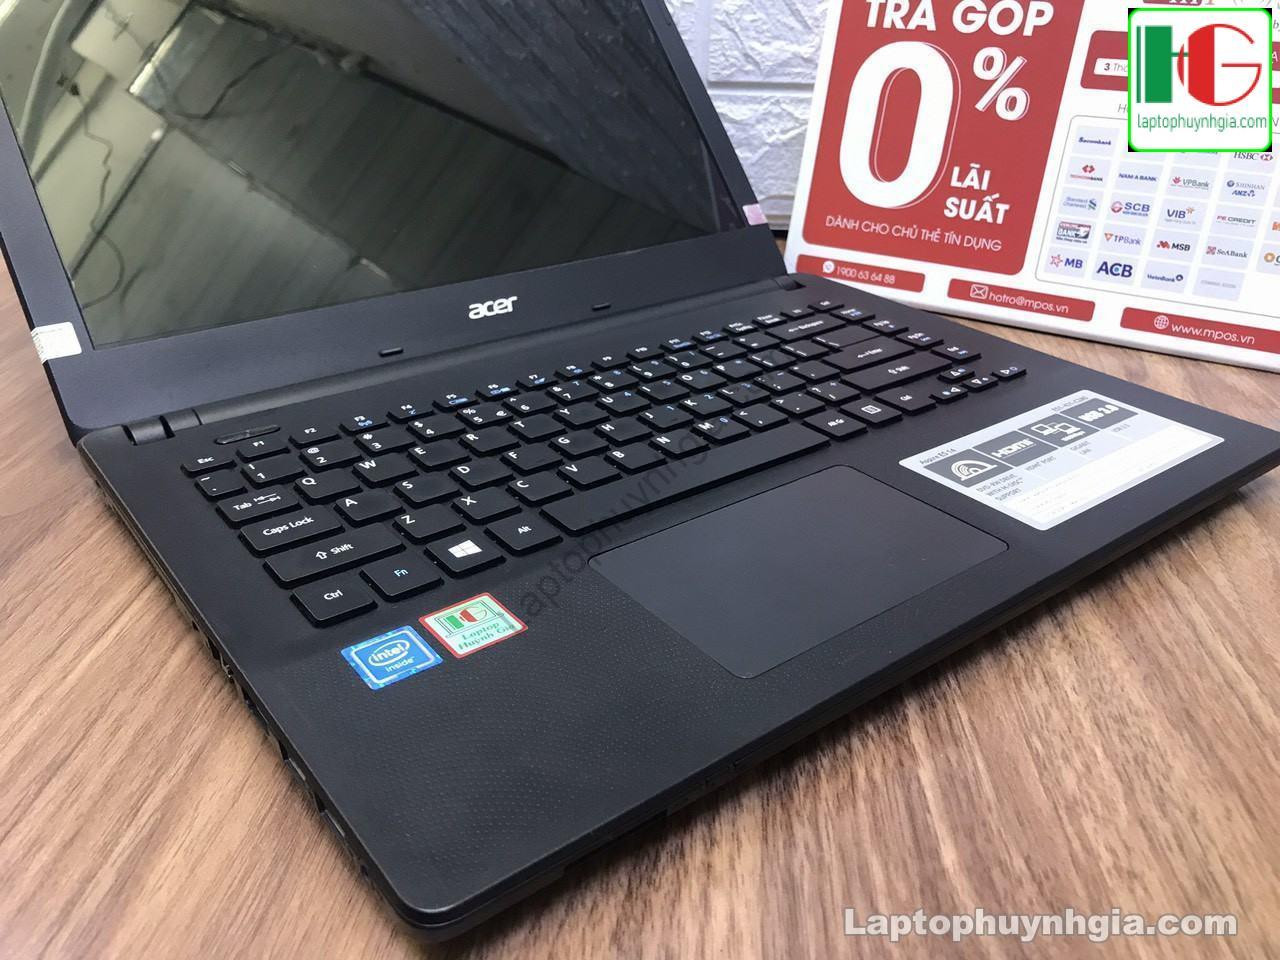 Acer Es1 N3060 4g 500g Lcd 14 Laptopcubinhduong.vn 2